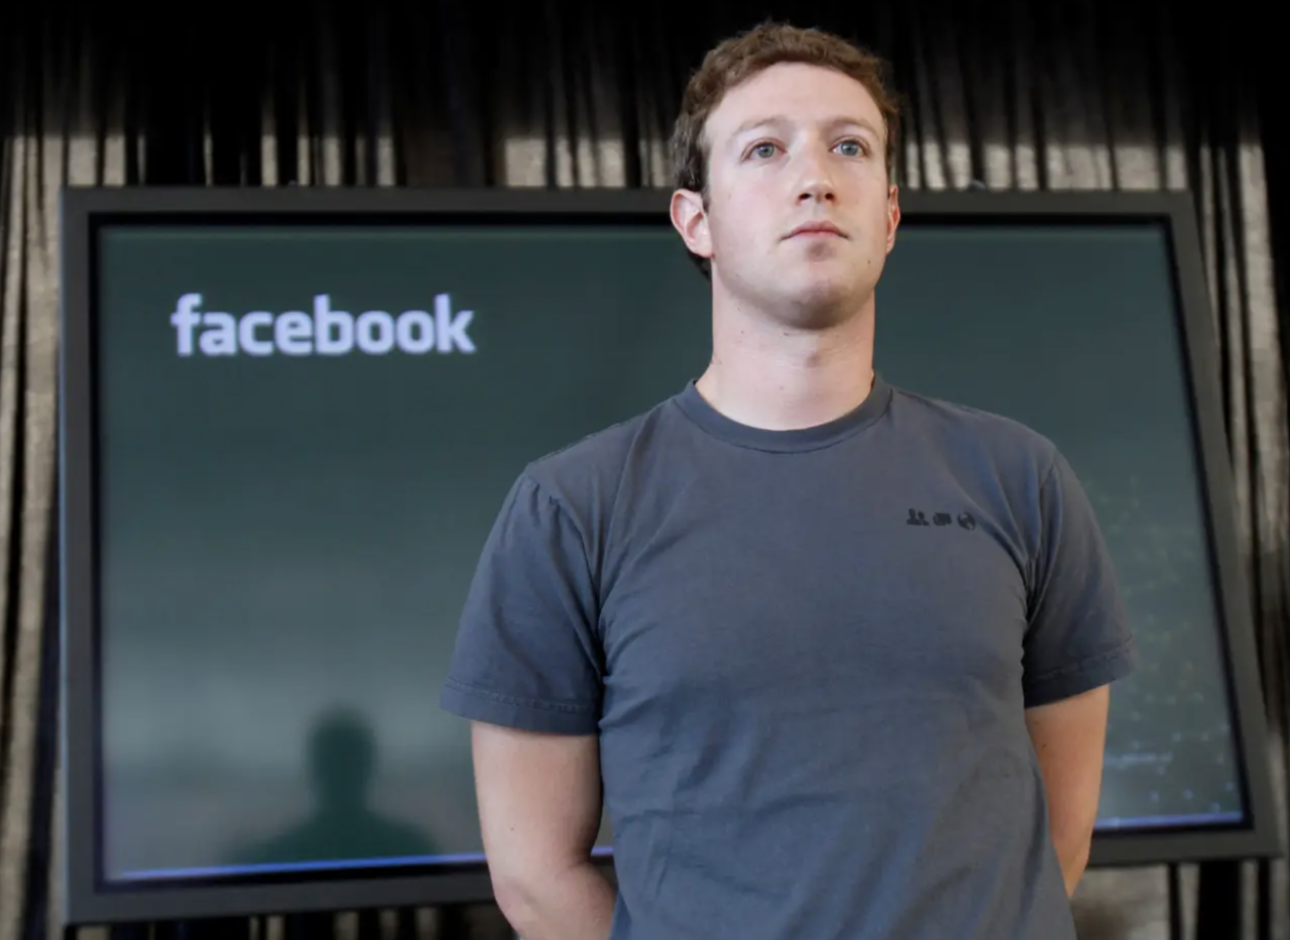 Facebook Tells Staff to Avoid Wearing Company-Branded Clothing for Their Own Safety